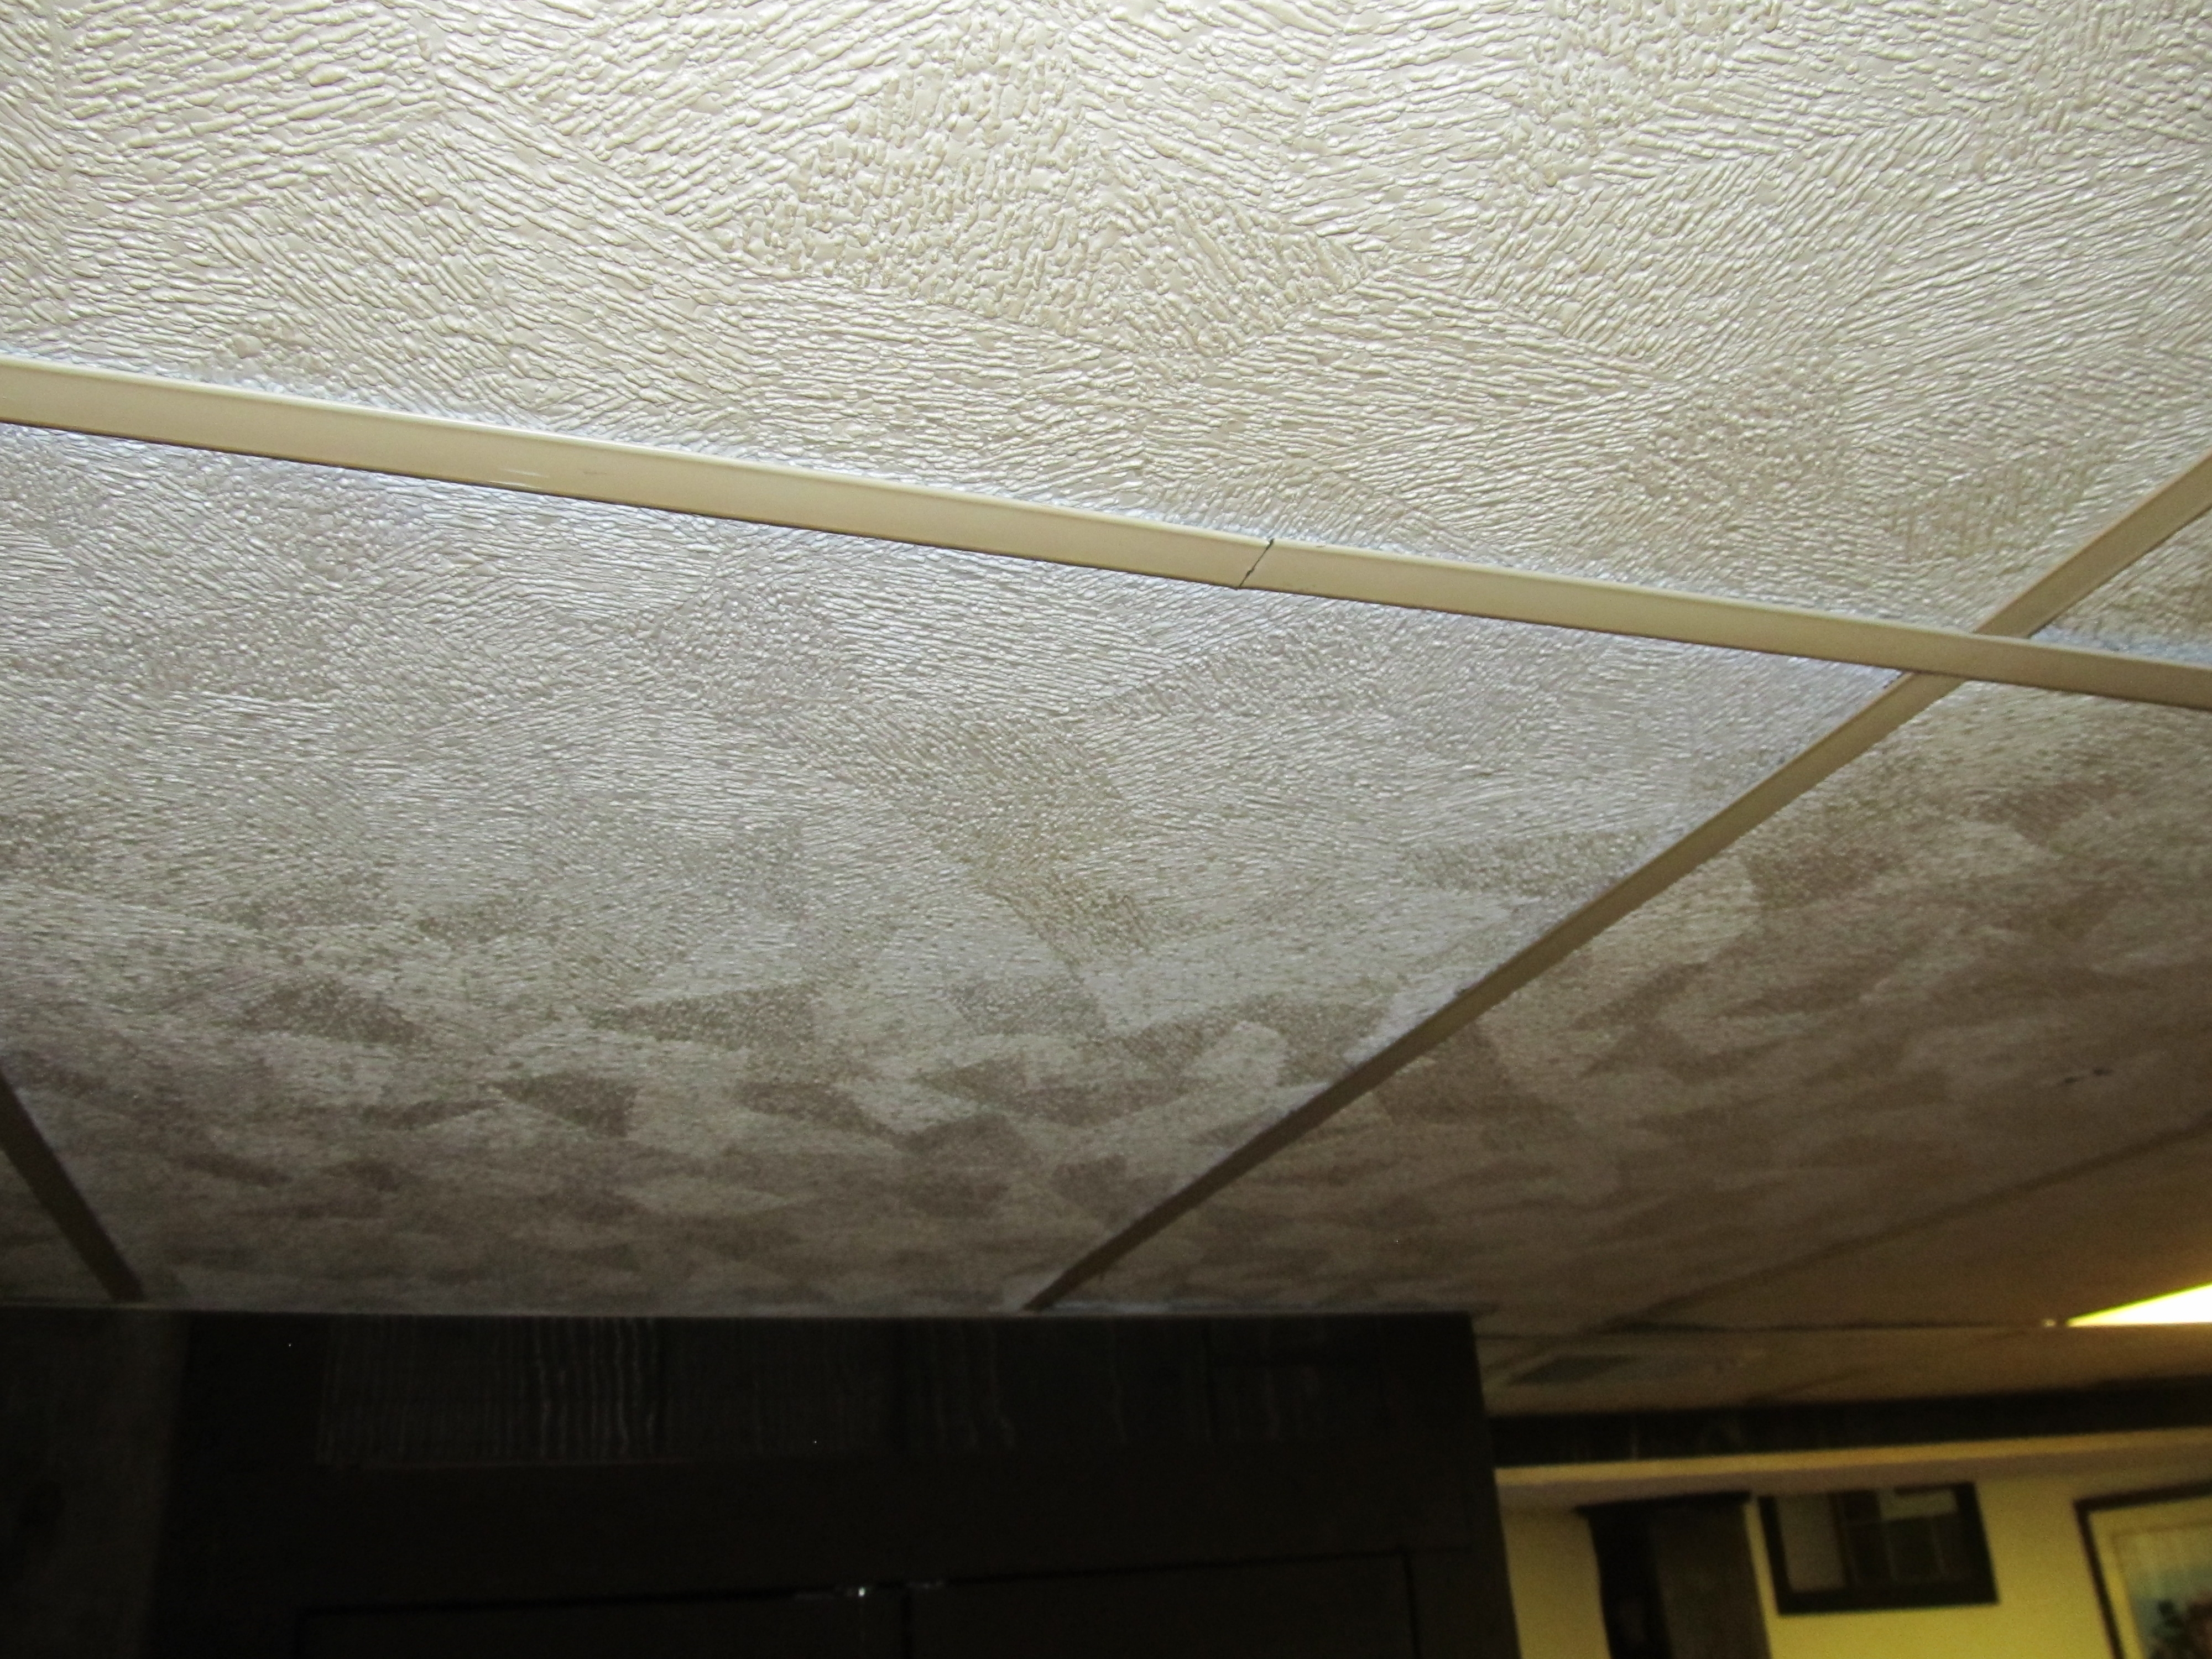 Covering Drop Ceiling Tiles Covering Drop Ceiling Tiles tutorial cover ugly ceiling tiles with fabric the tromp queen 4000 X 3000